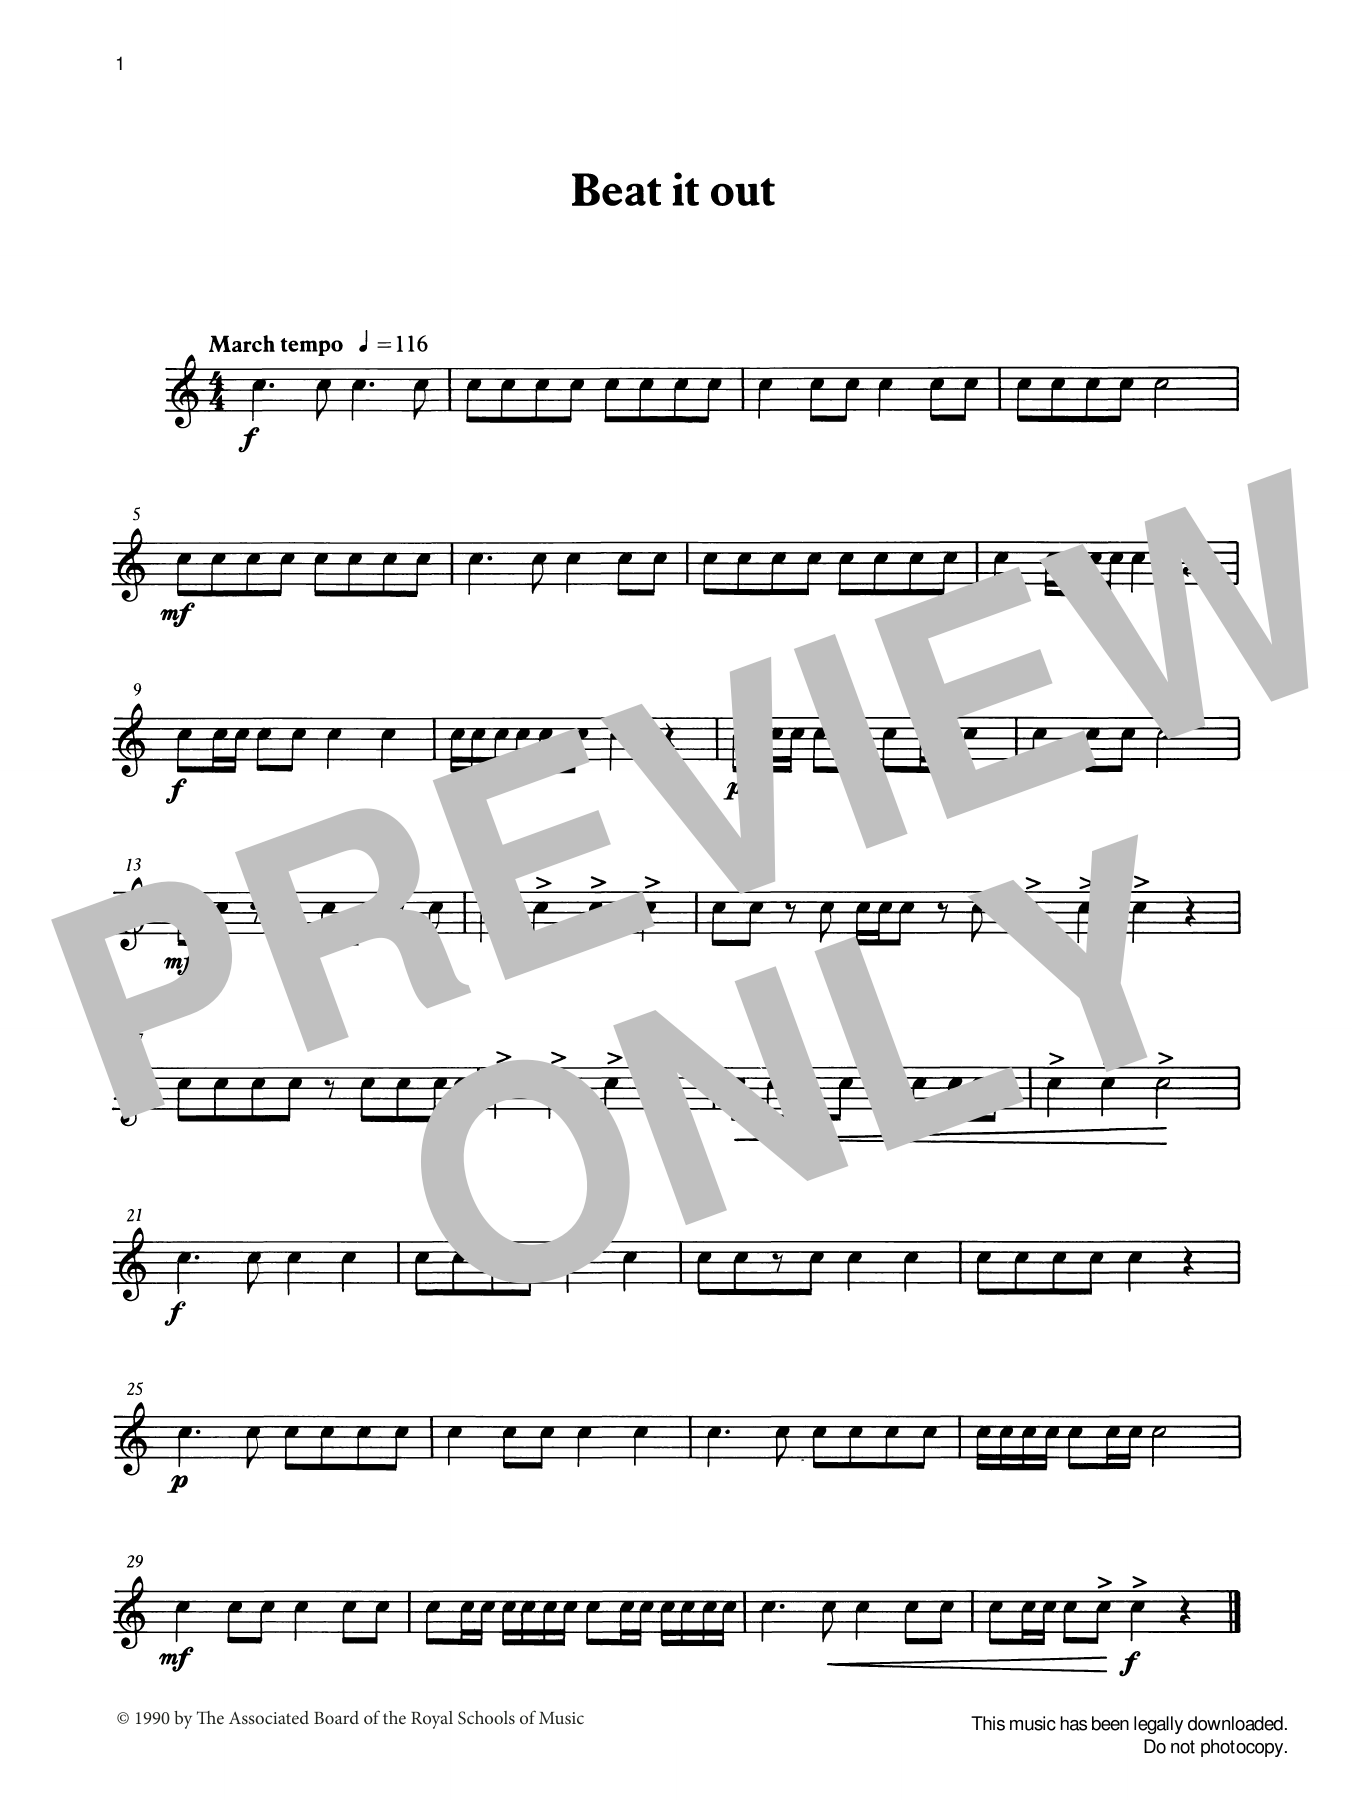 Download Ian Wright and Kevin Hathaway Beat it out from Graded Music for Snare Sheet Music